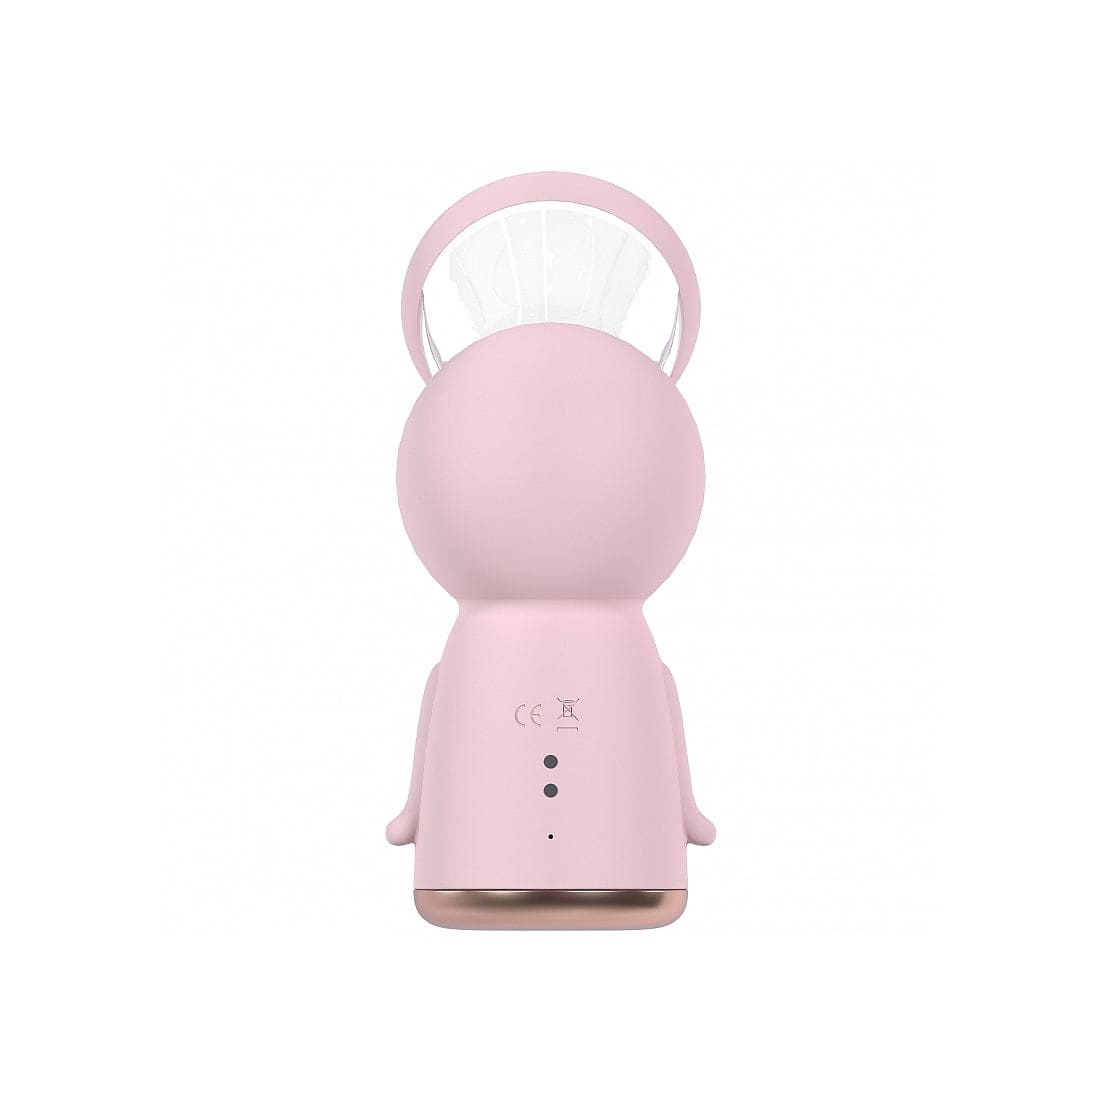 Shots Pumped Exquisite Automatic 13-Speed Silicone Rechargeable Vulva & Breast Pump Pink - Rolik®